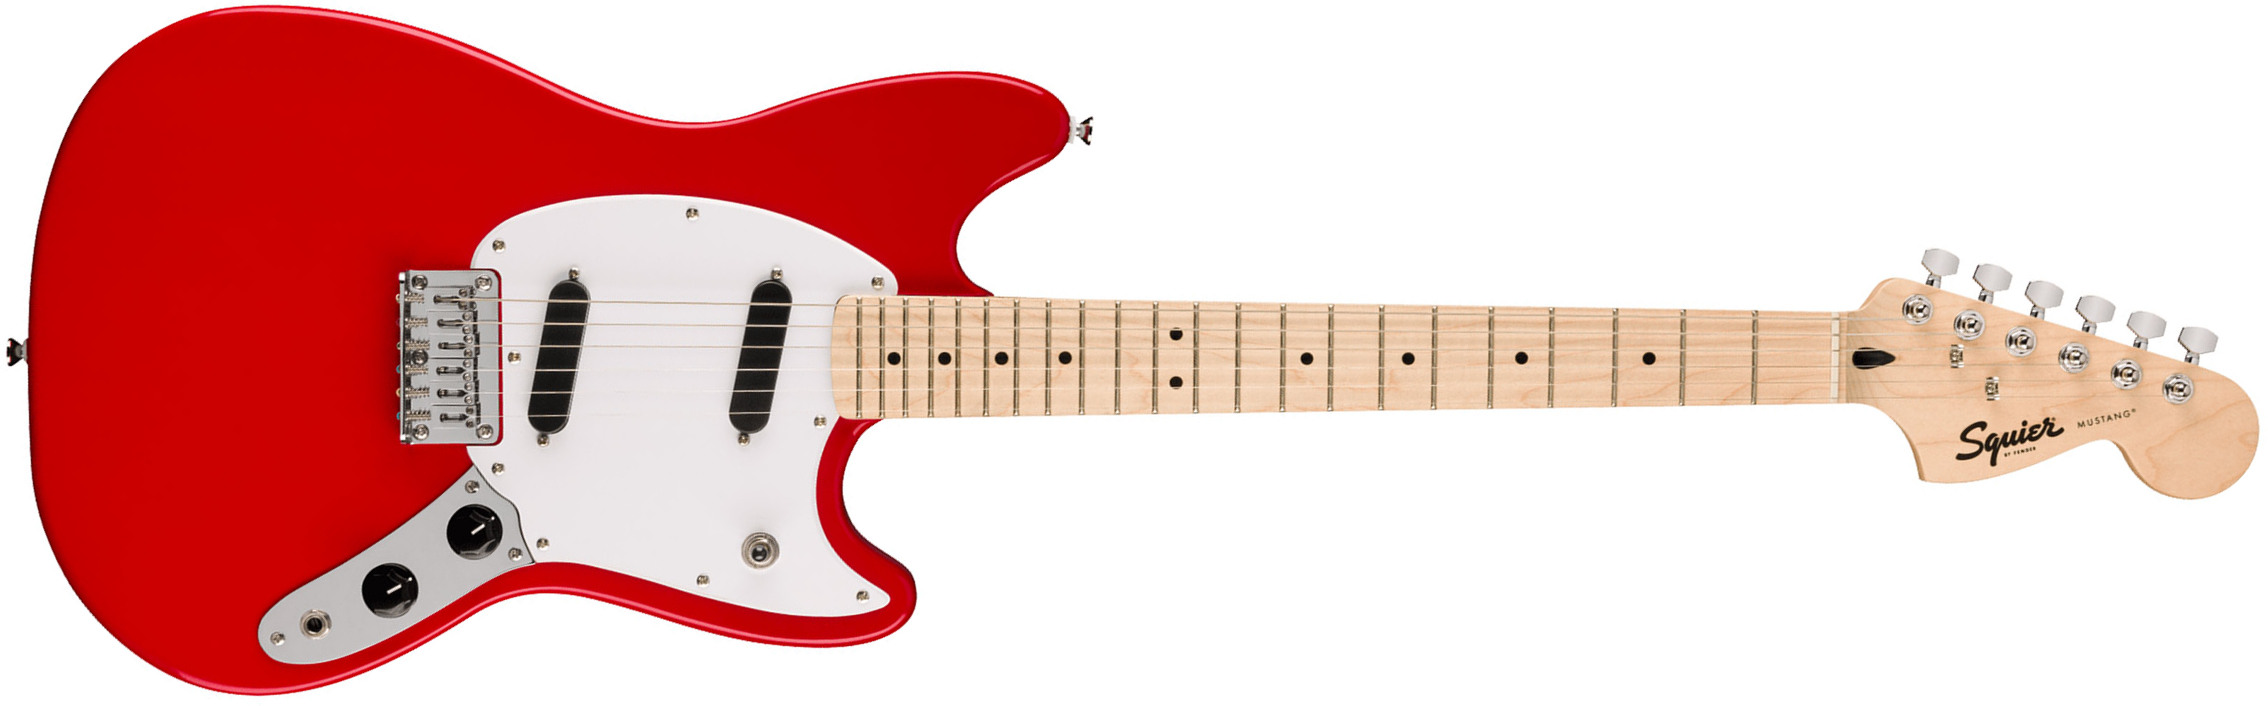 Squier Mustang Sonic 2s Ht Mn - Torino Red - Guitarra electrica retro rock - Main picture